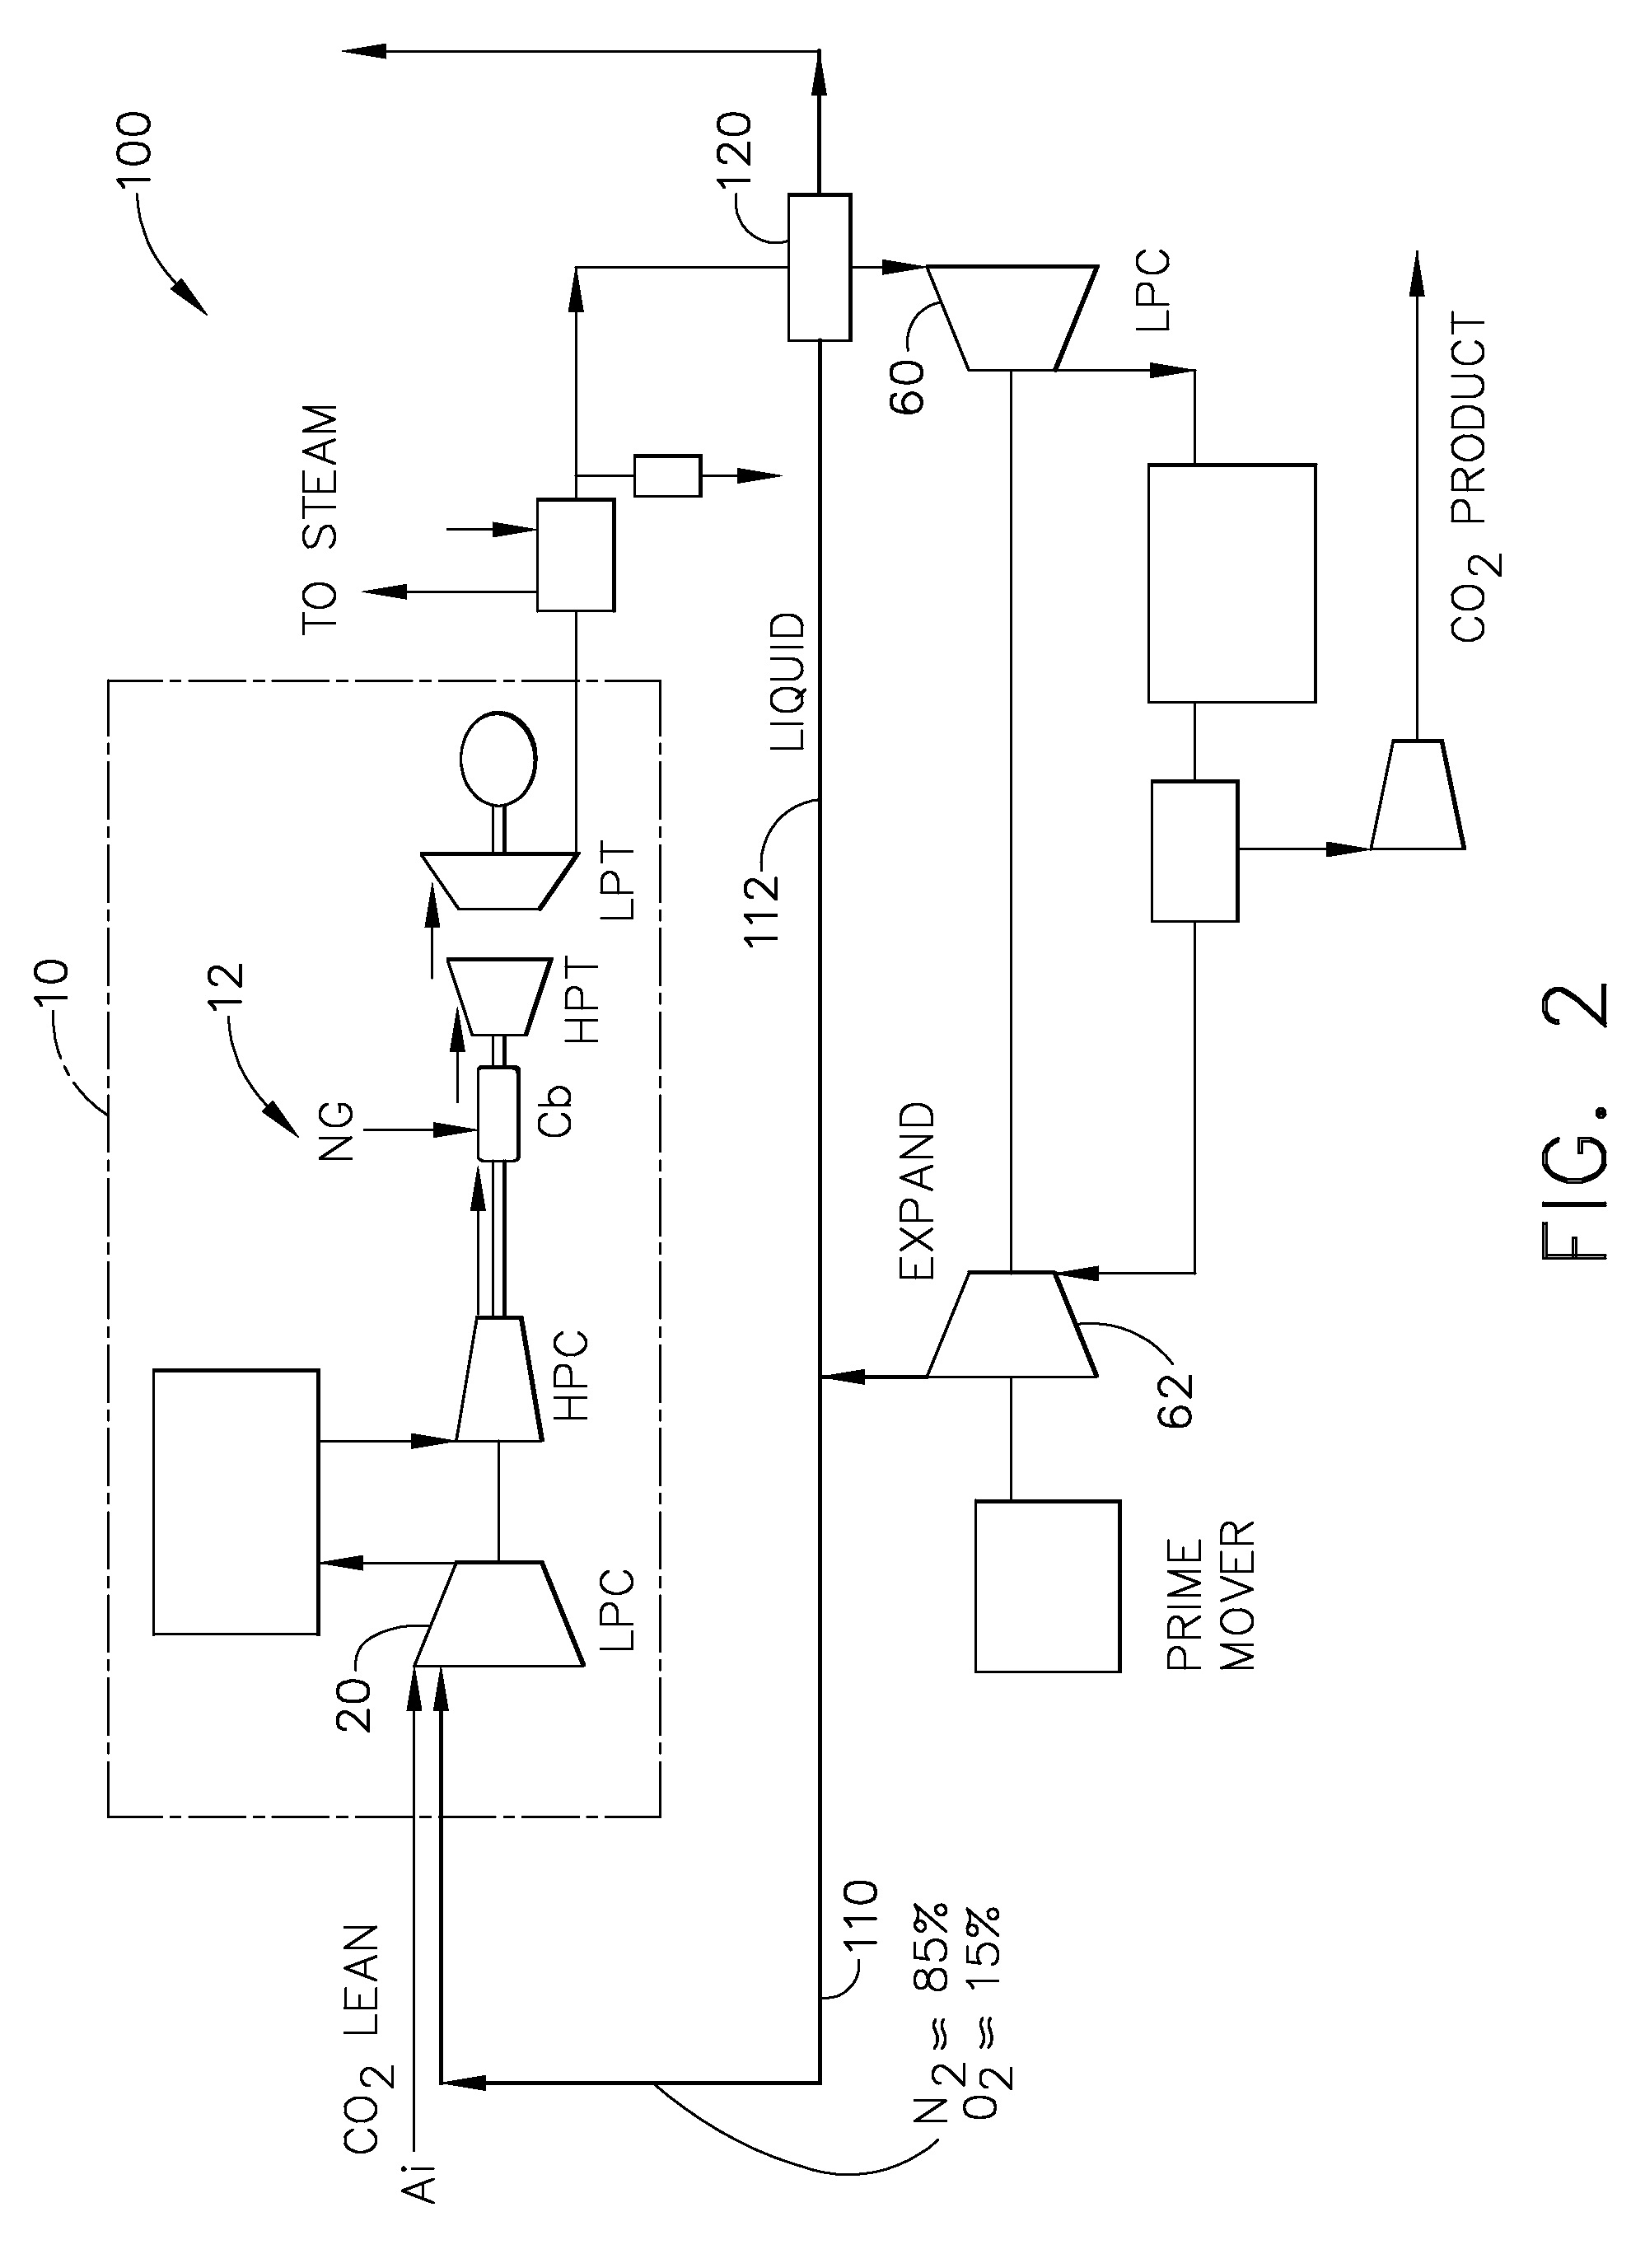 Method and system for reducing power plant emissions